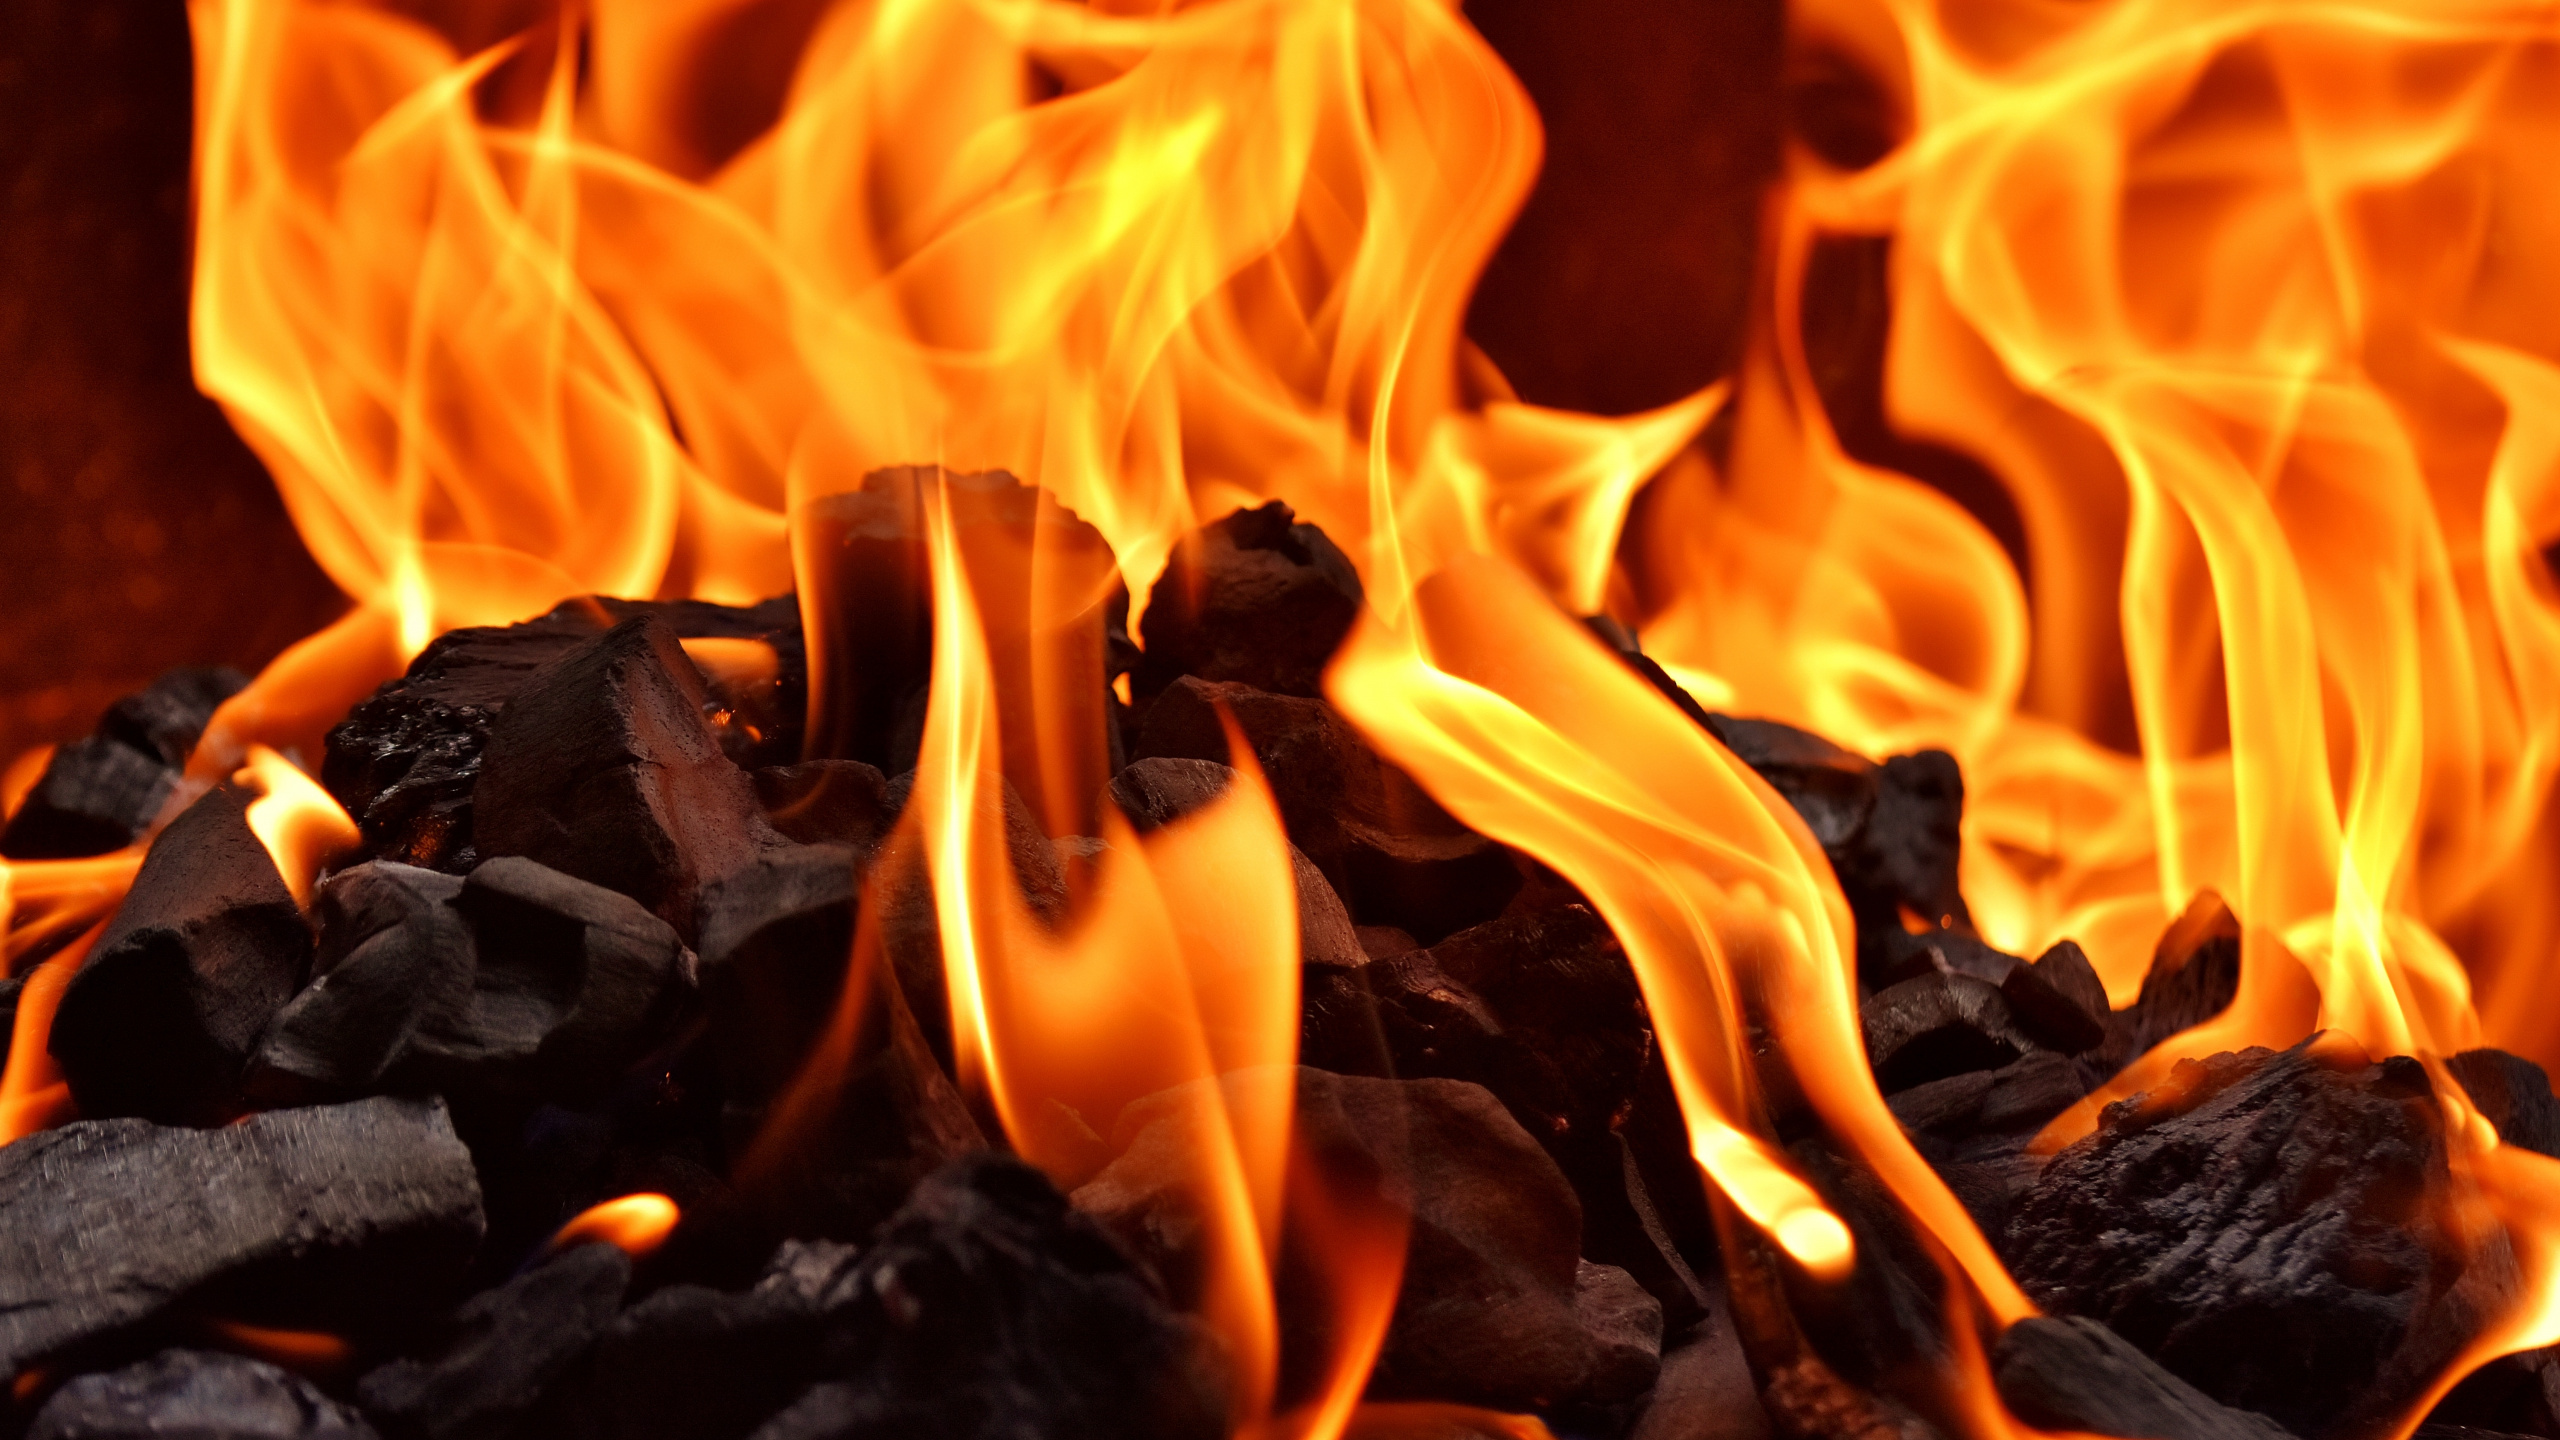 Burning Fire on Black Textile. Wallpaper in 2560x1440 Resolution